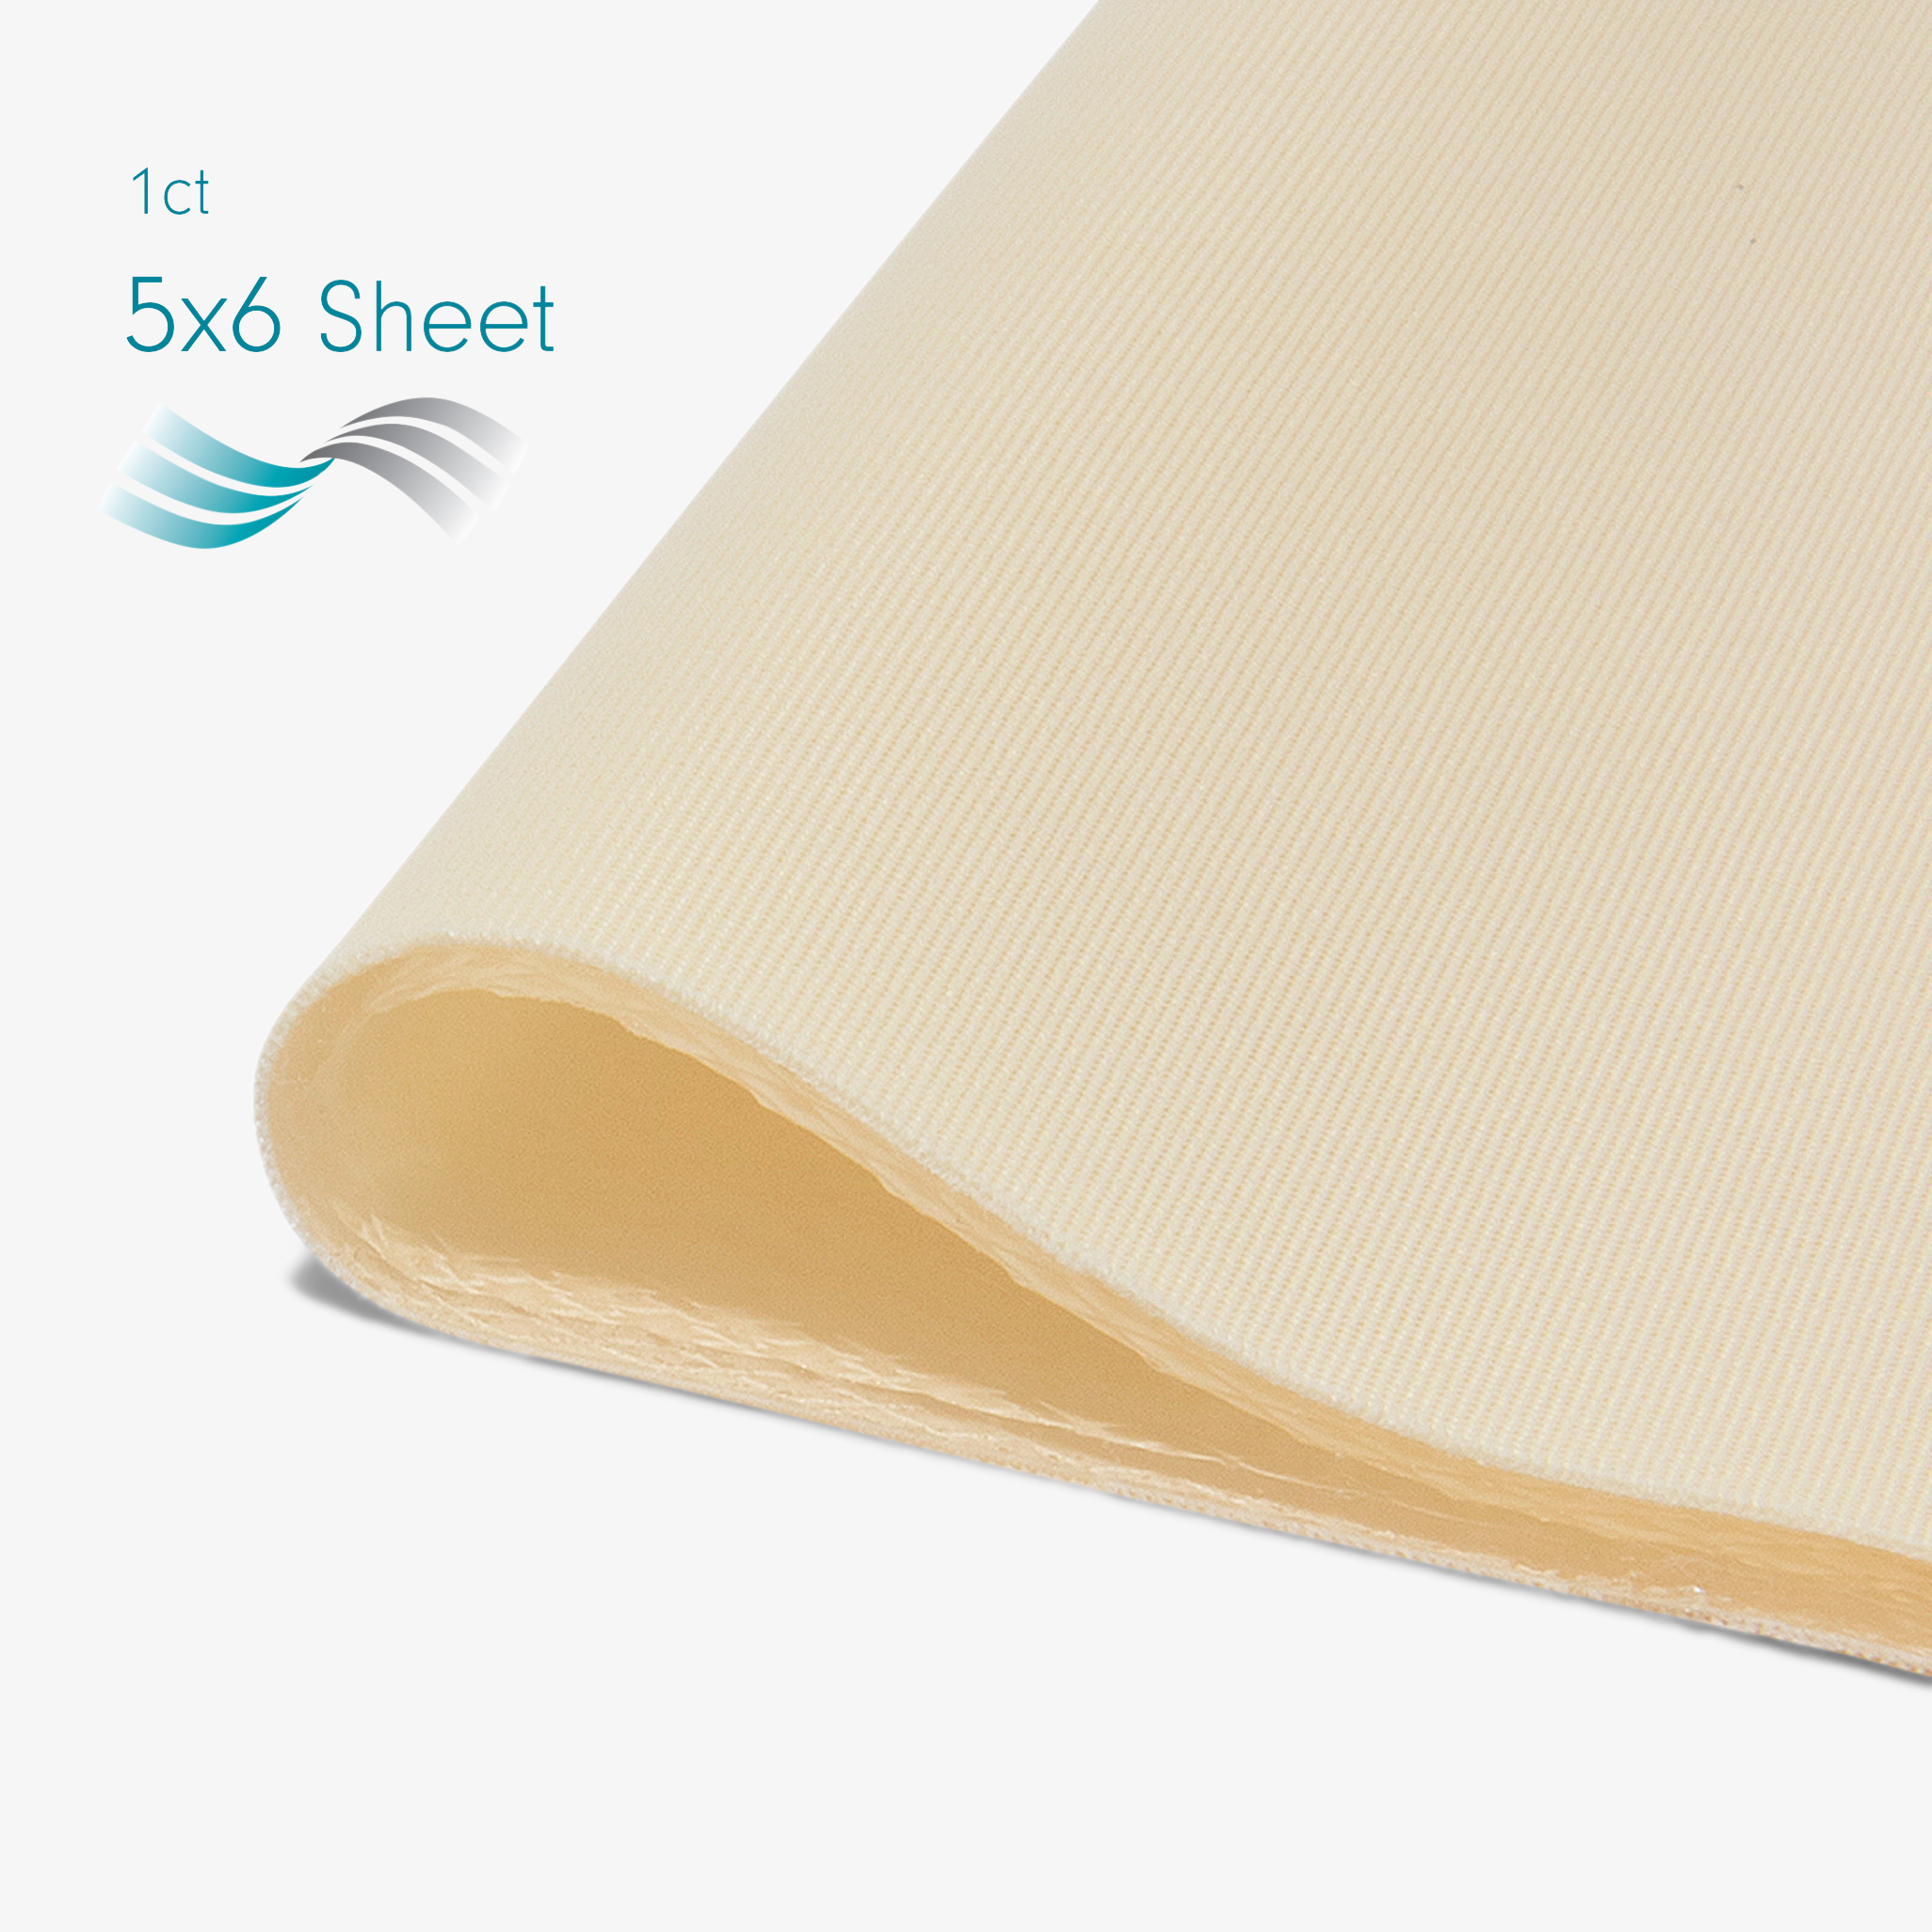 Advanced Medical-Grade Silicone Sheet 5" x 6" 1 count| beige